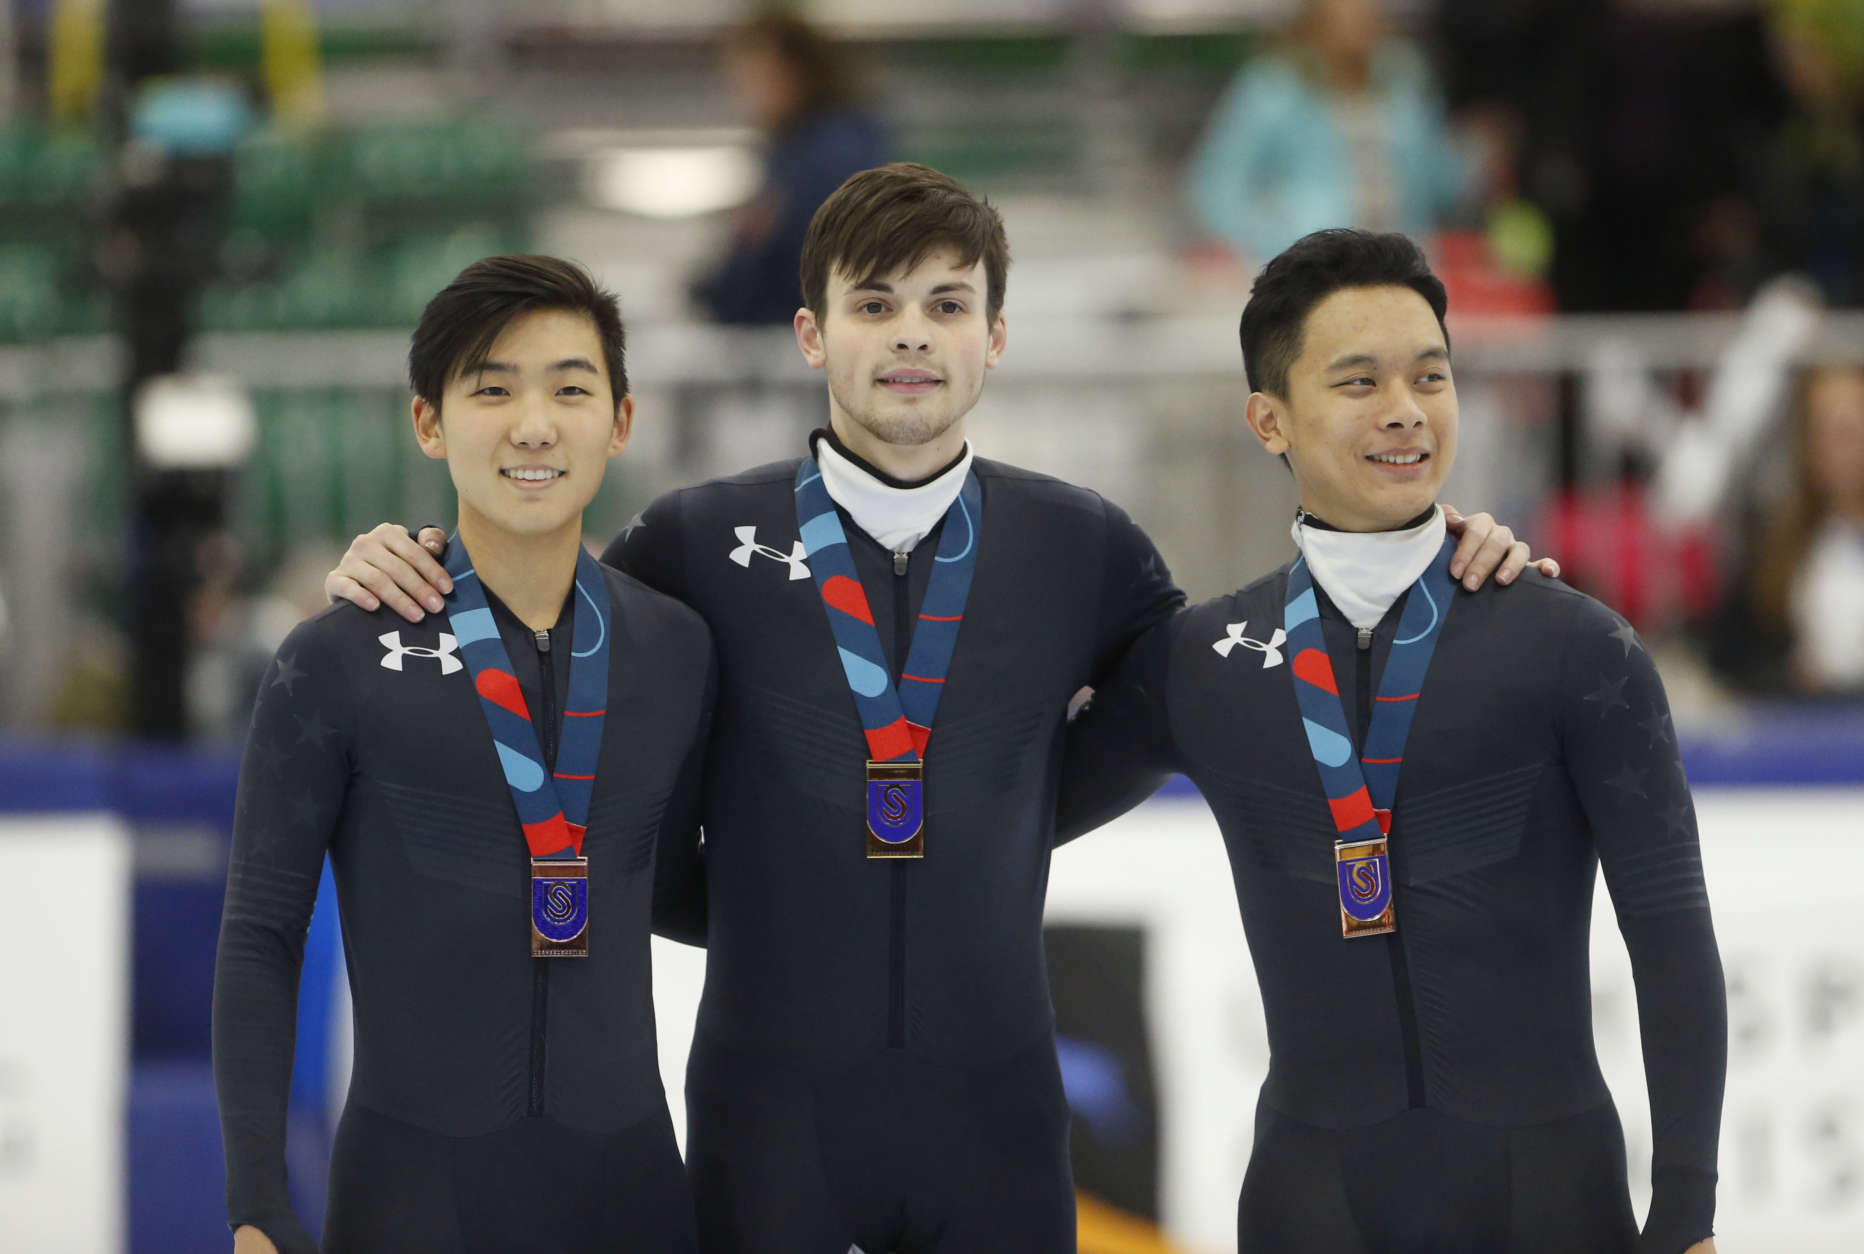 First place finisher John-Henry Krueger, center, stands with third place finisher, left, Thomas Insuk Hong and second place finisher Aaron Tran, right, following the men's 500-meter during the U.S. Olympic short track speedskating trials Saturday, Dec. 16, 2017, in Kearns, Utah. (AP Photo/Rick Bowmer)